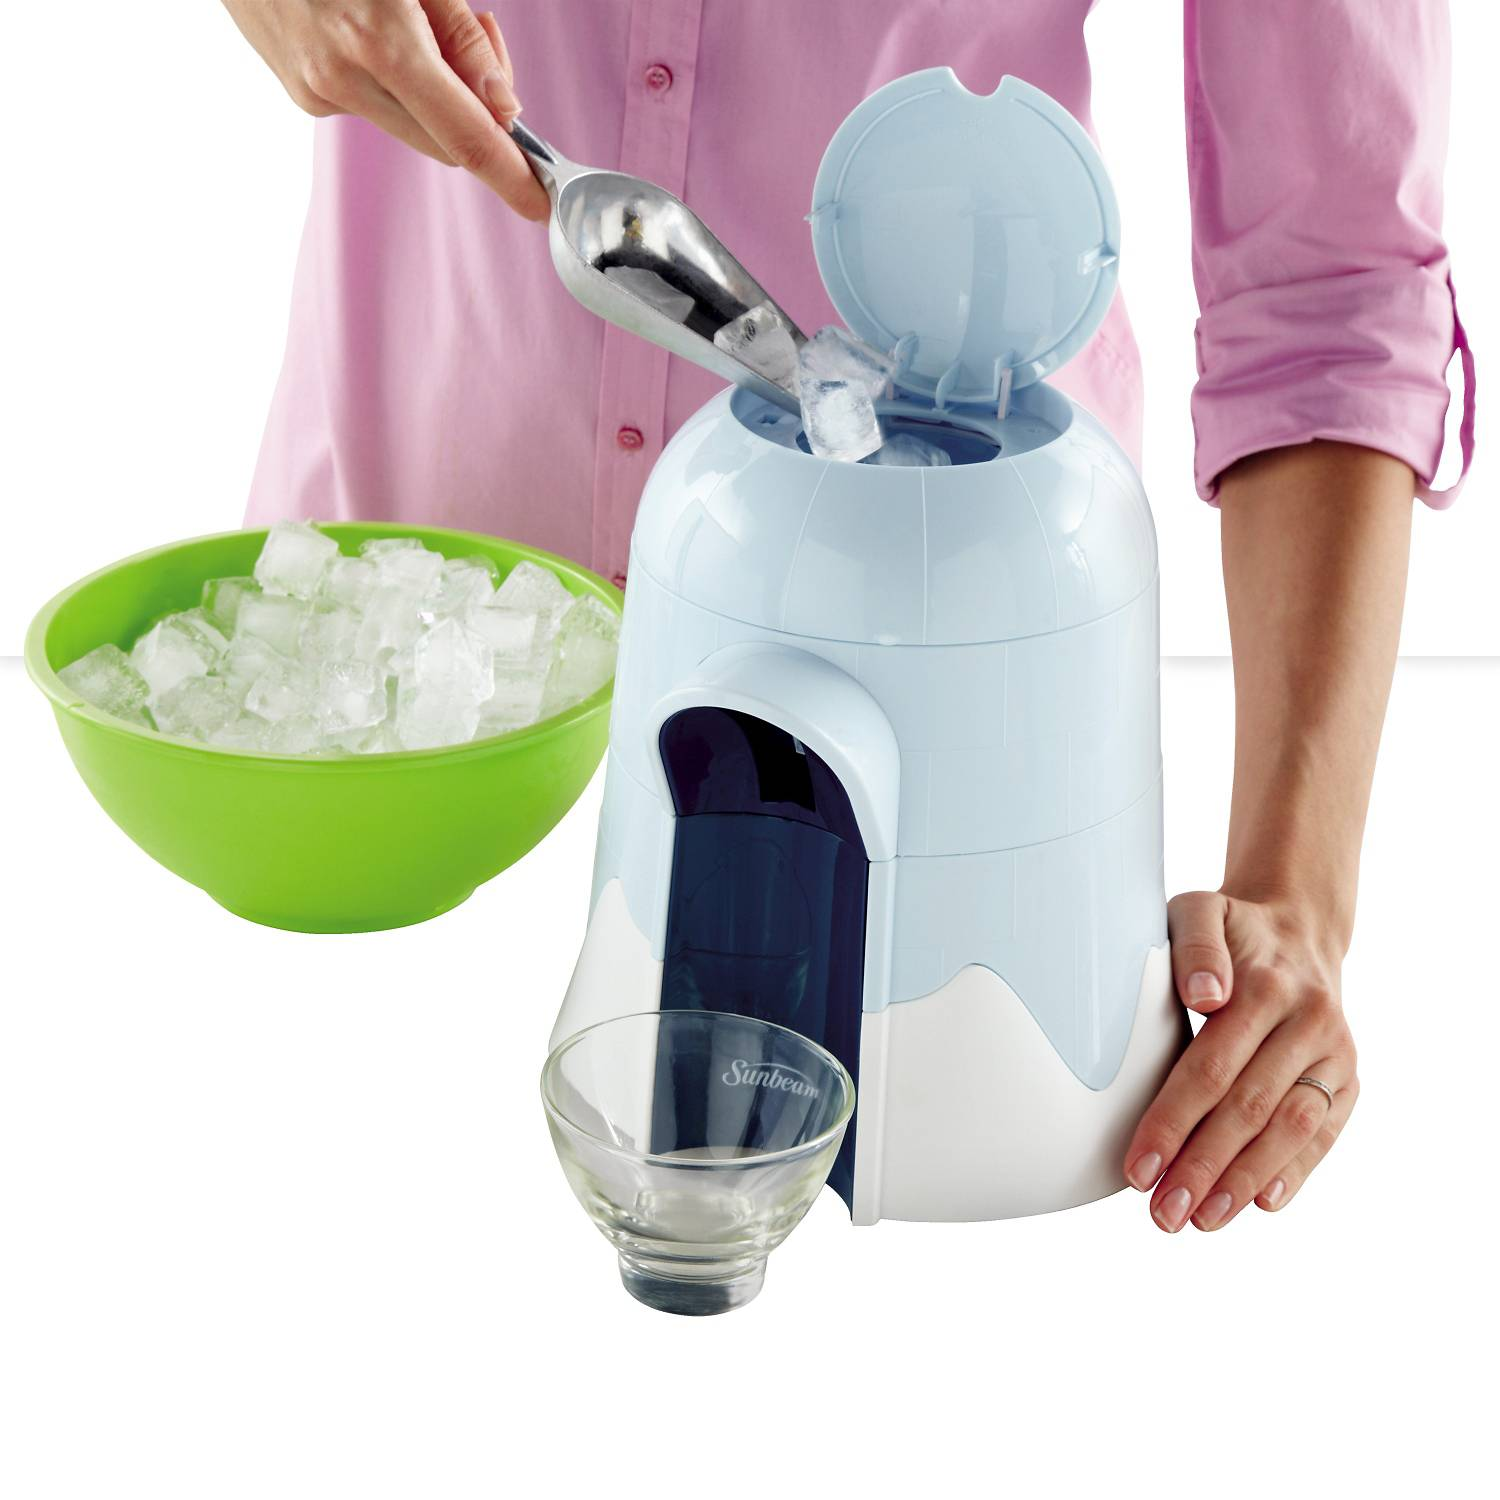 Target: Sunbeam Igloo Snow Cone Maker Only $15.99 with Cartwheel Offer!